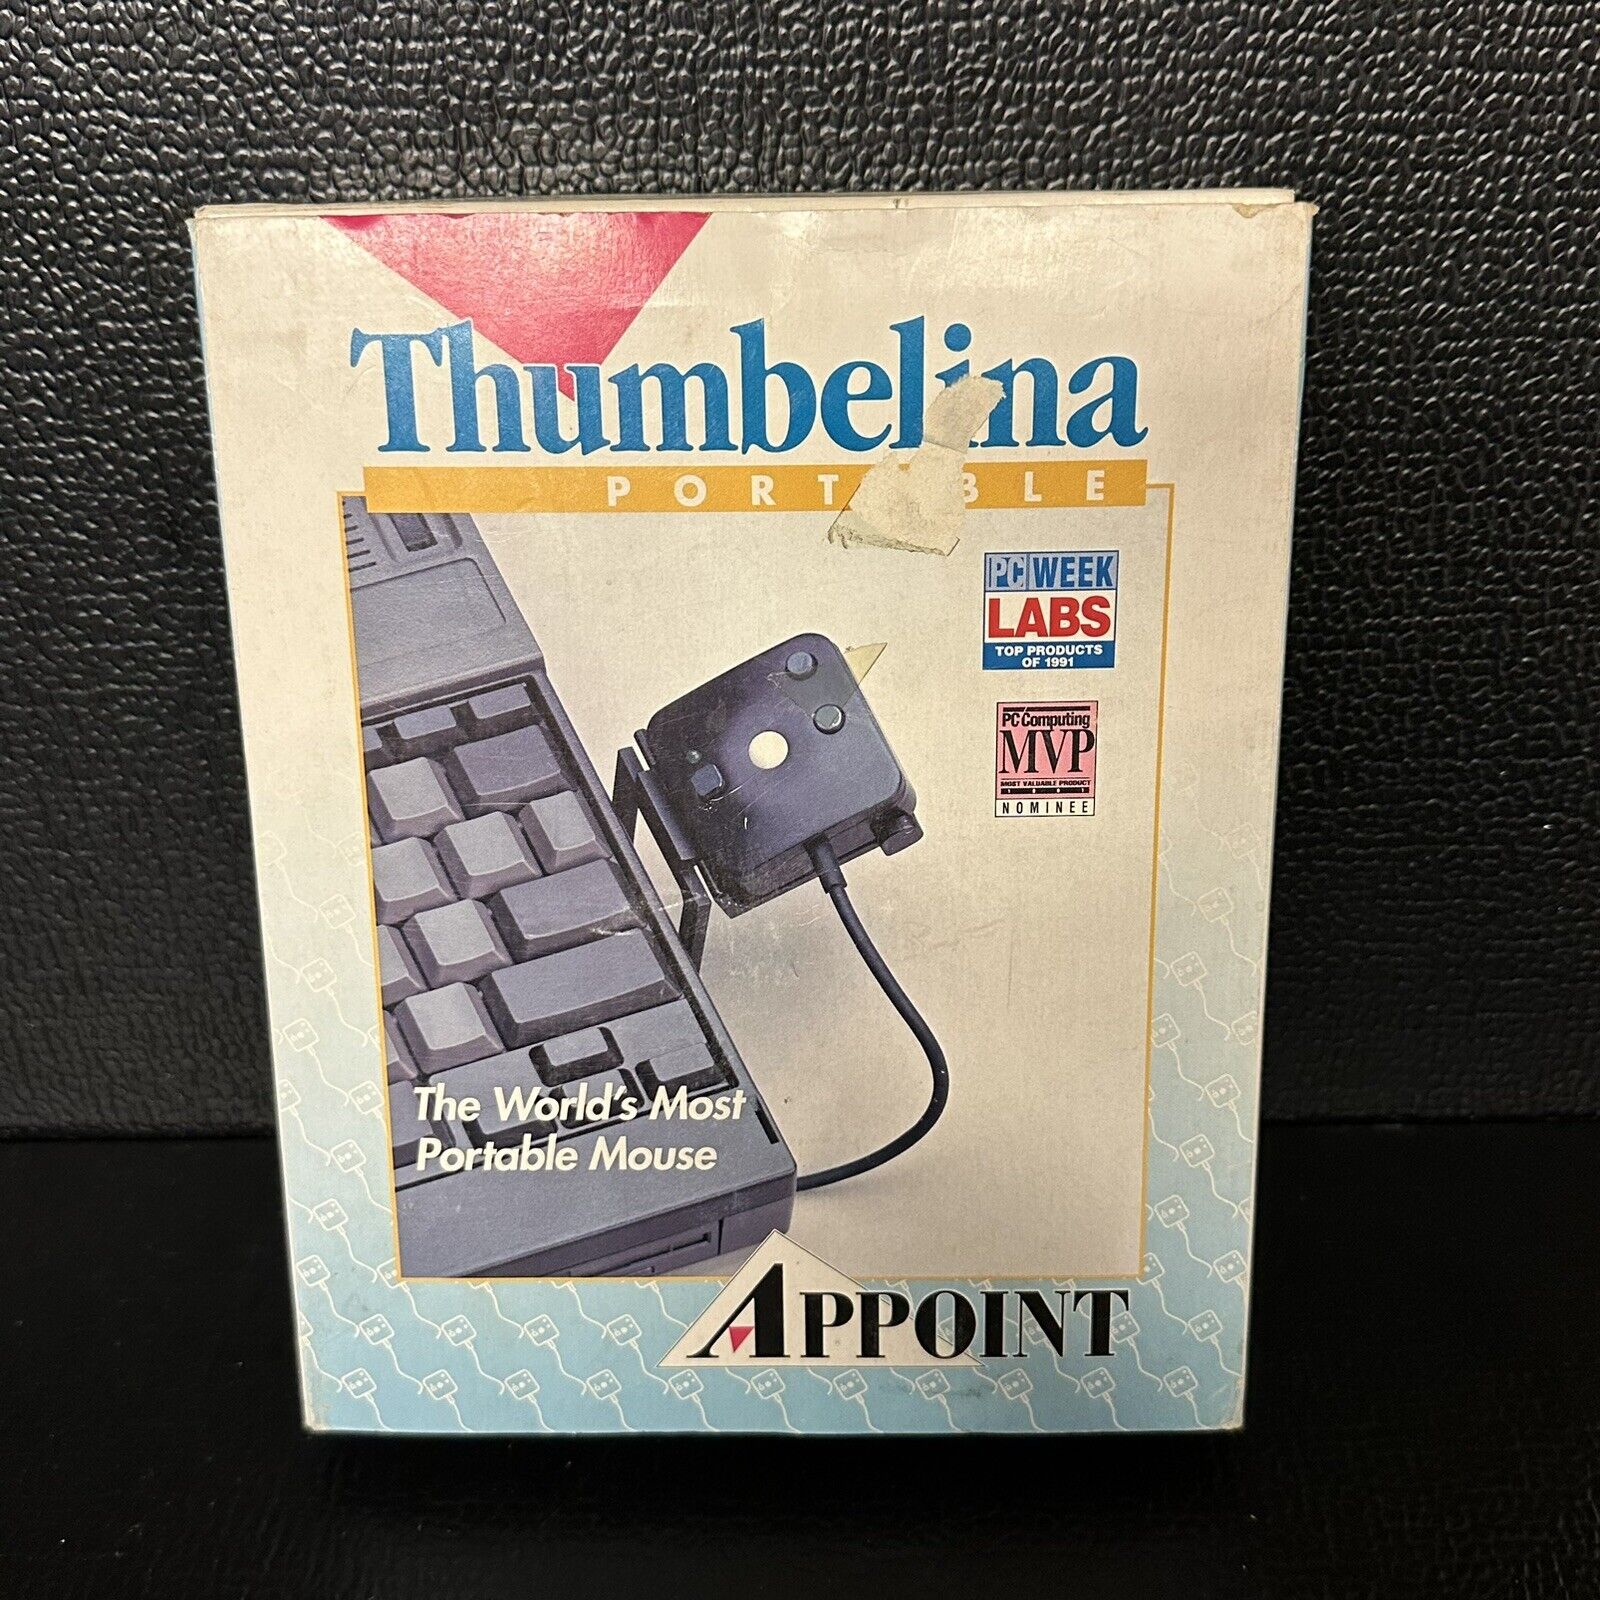 Vintage IBM PS/2 Accessory - Appoint Thumbelina - Open Box - Untested